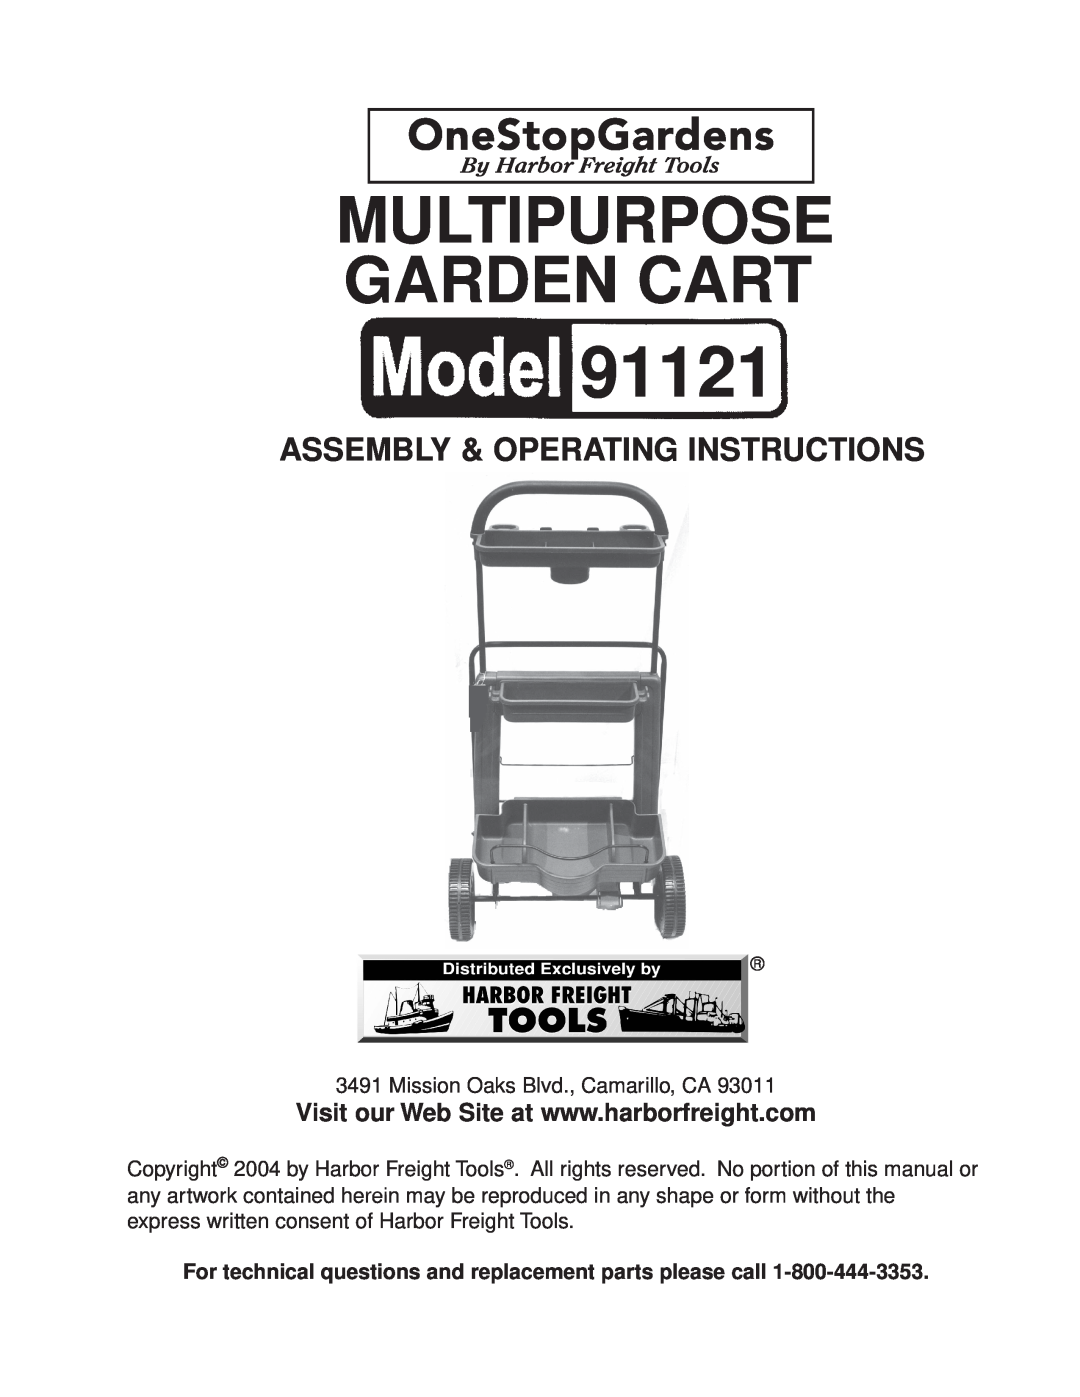 Harbor Freight Tools 91121 manual Multipurpose Garden Cart, Assembly & Operating Instructions 